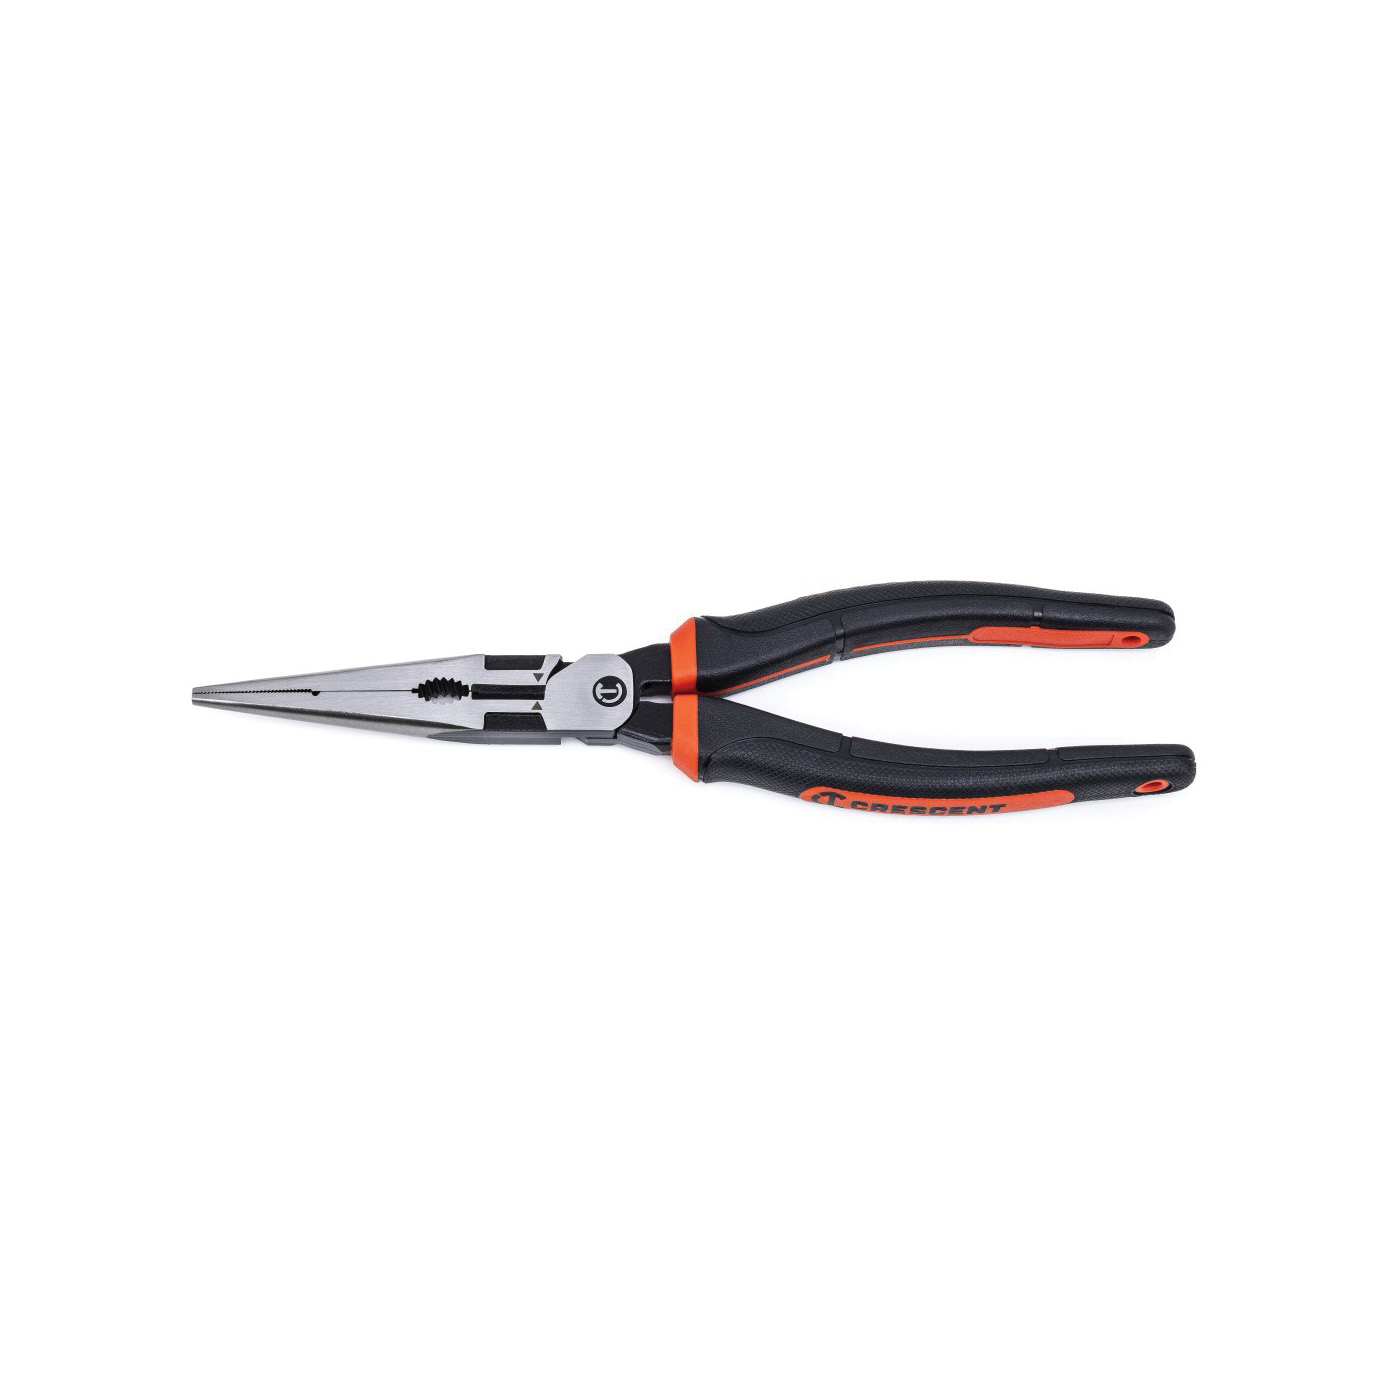 Crescent Z2 K9 Series Z6548CG Plier, 8-1/2 in OAL, 11 AWG Cutting Capacity, 2 in Jaw Opening, Black/Rawhide Handle